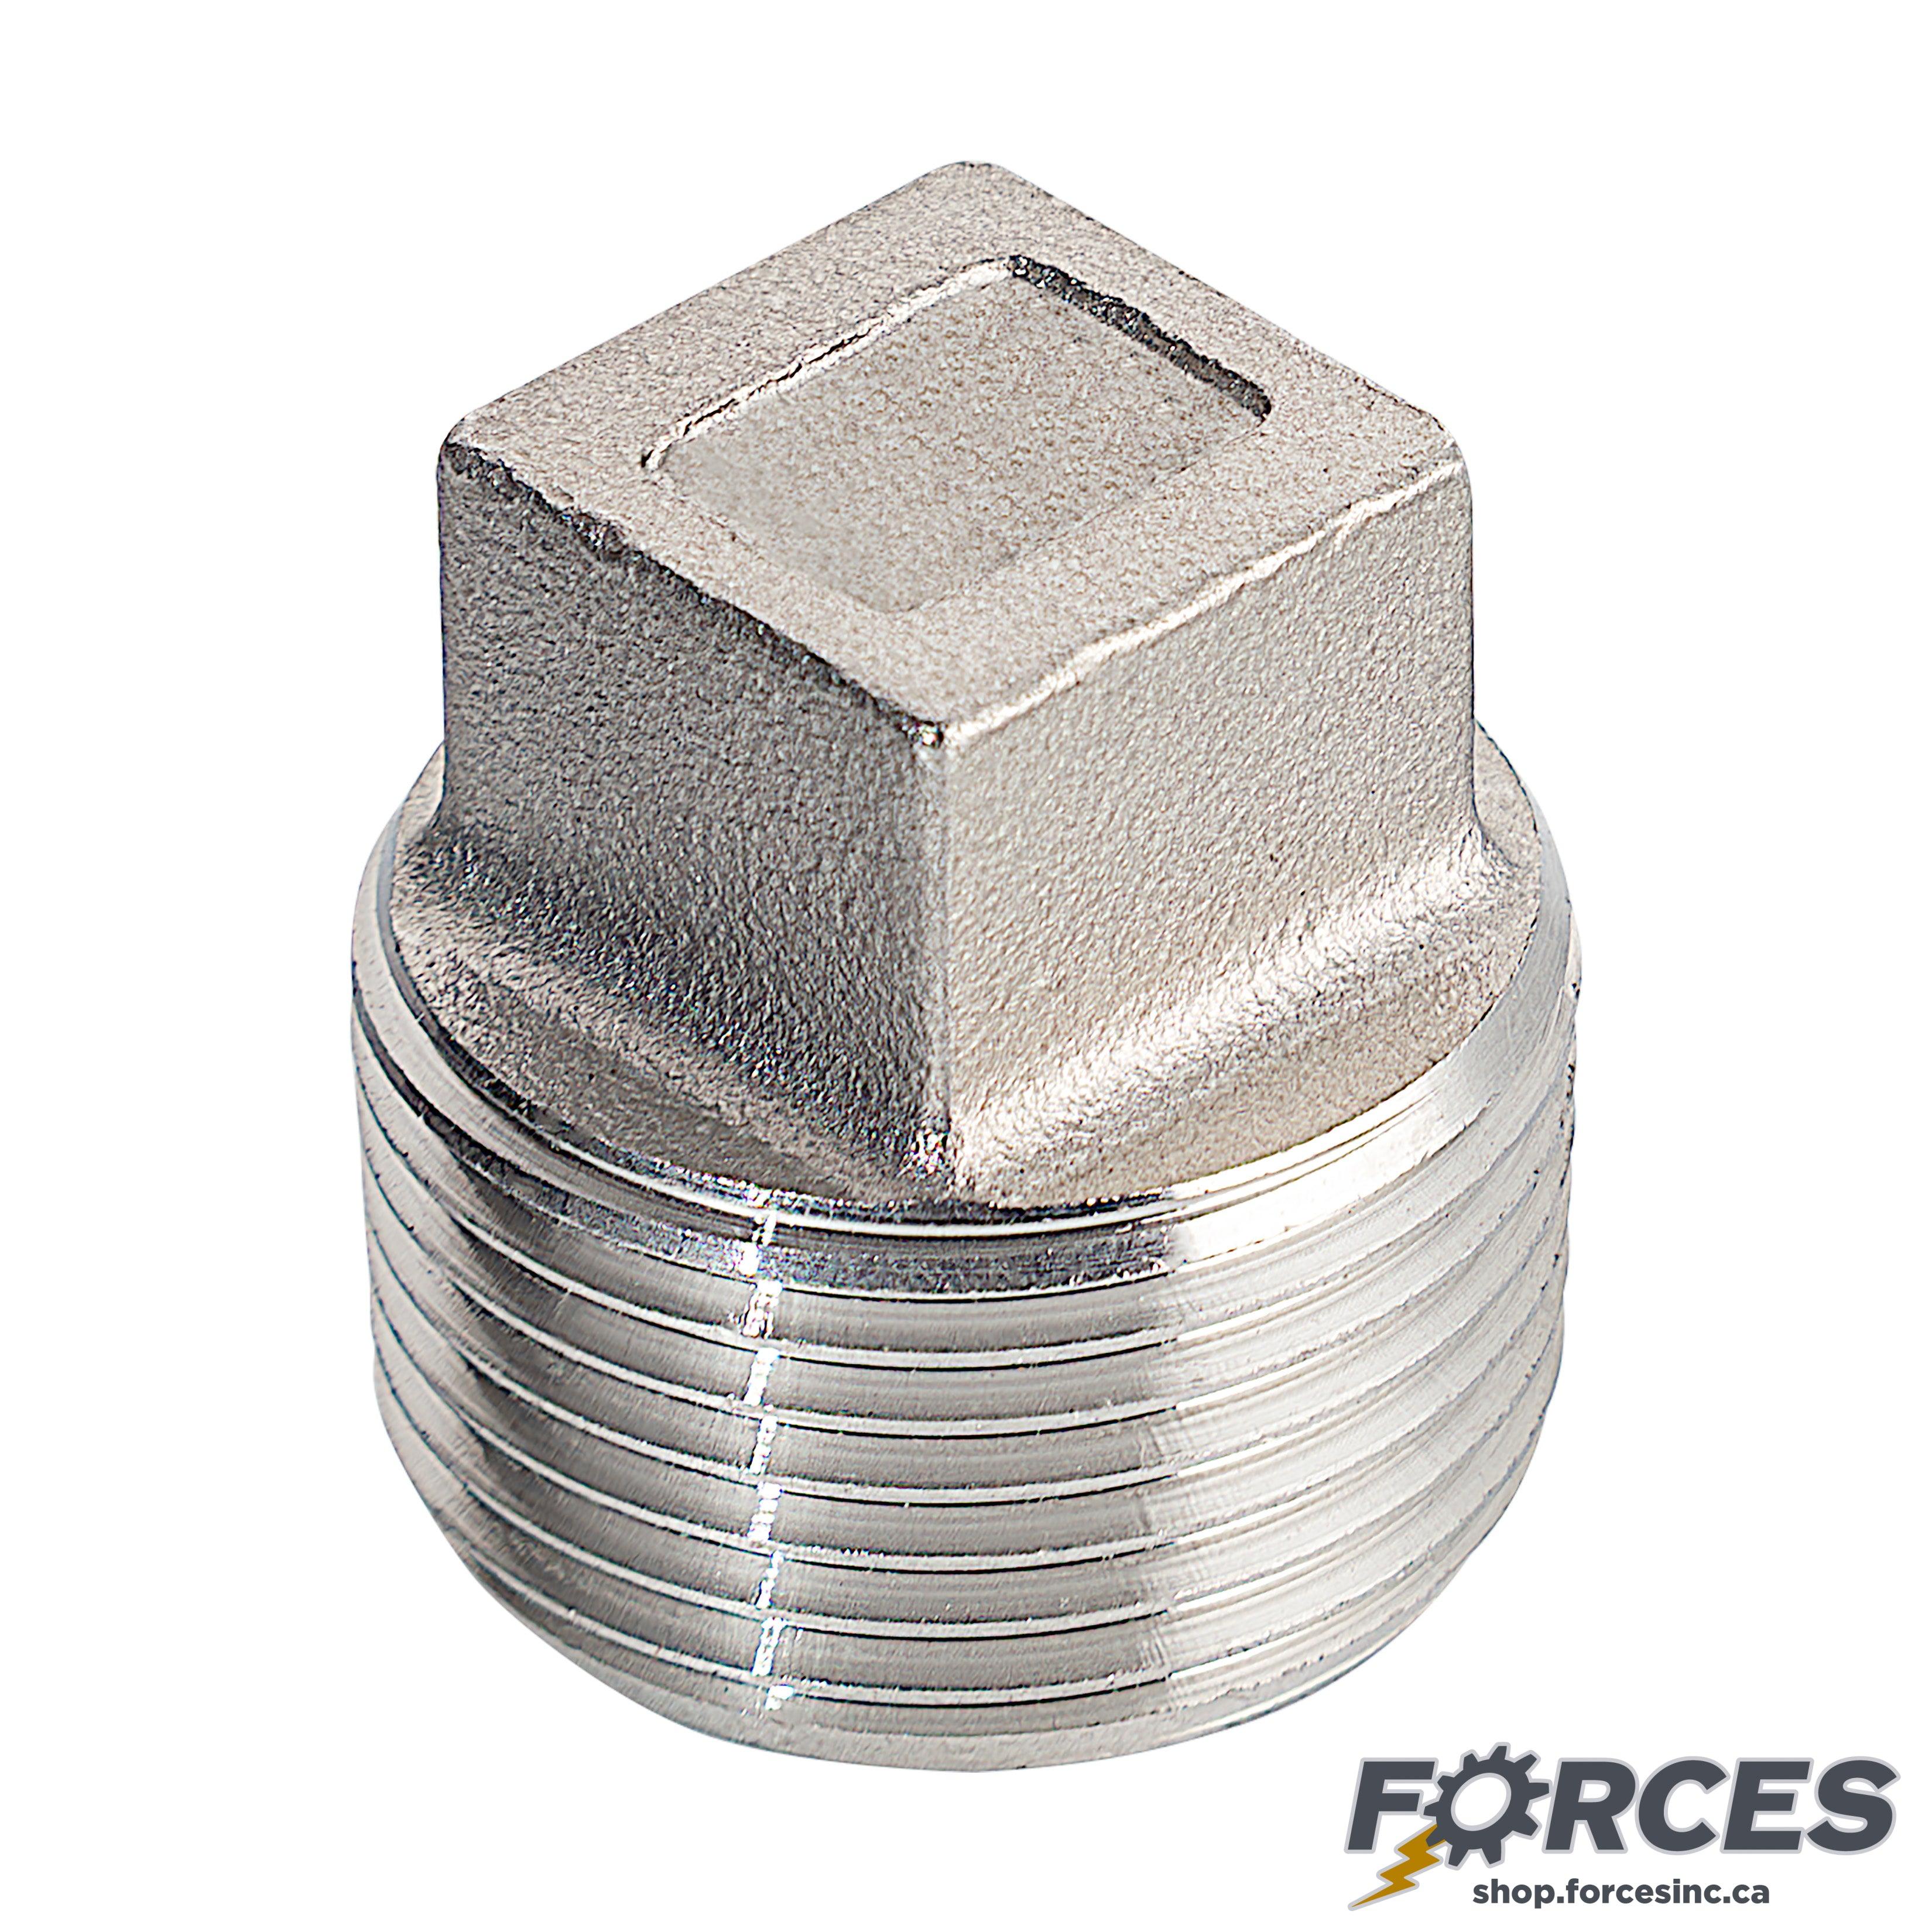 1/4" Square Plug NPT #150 - Stainless Steel 304 - Forces Inc